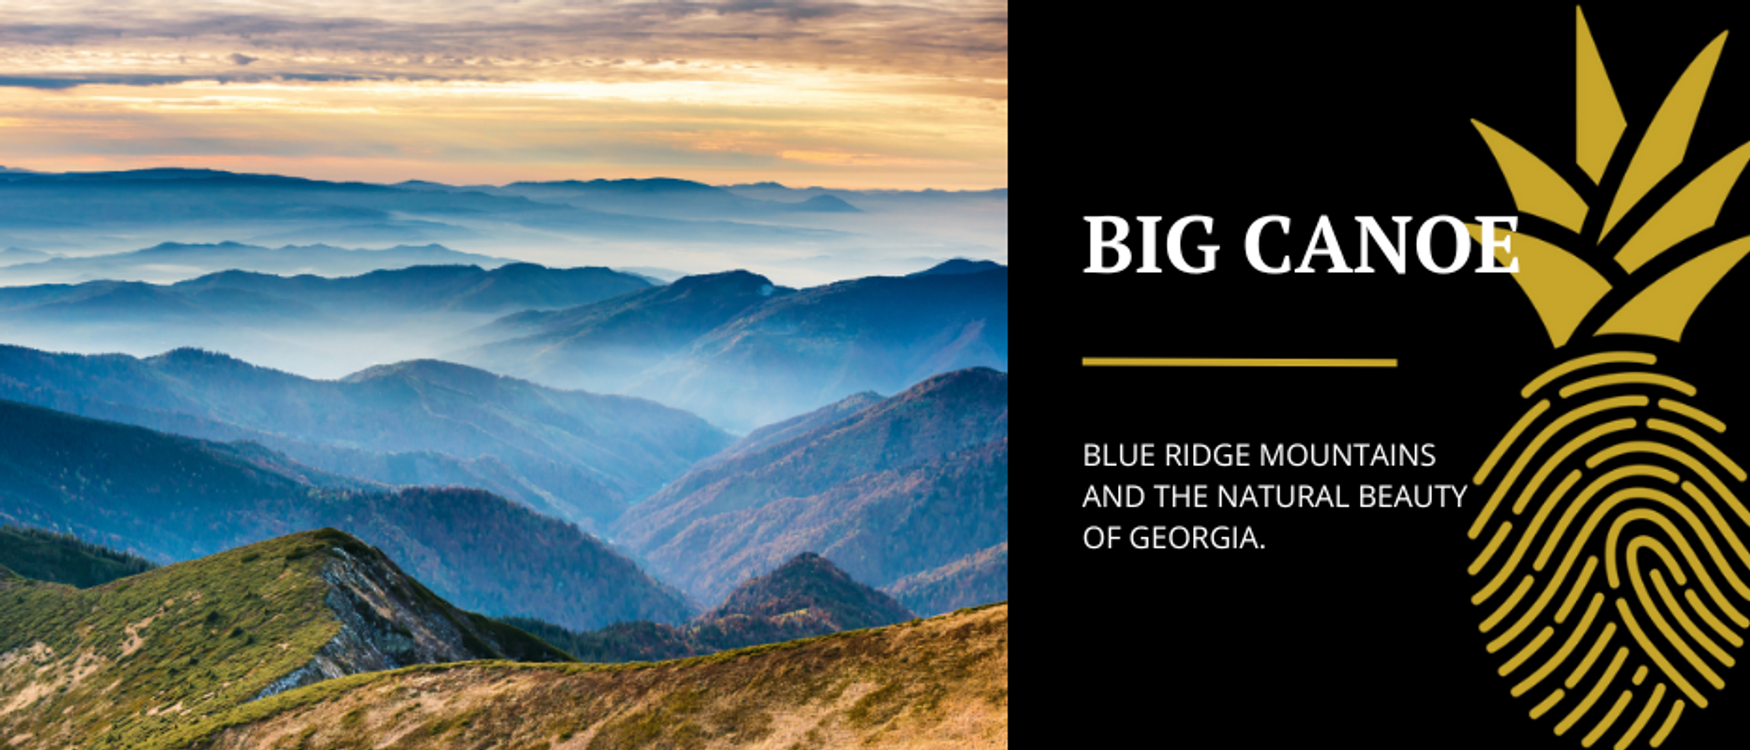 A view of the Blue Ridge Mountains and the natural beauty of Big Canoe